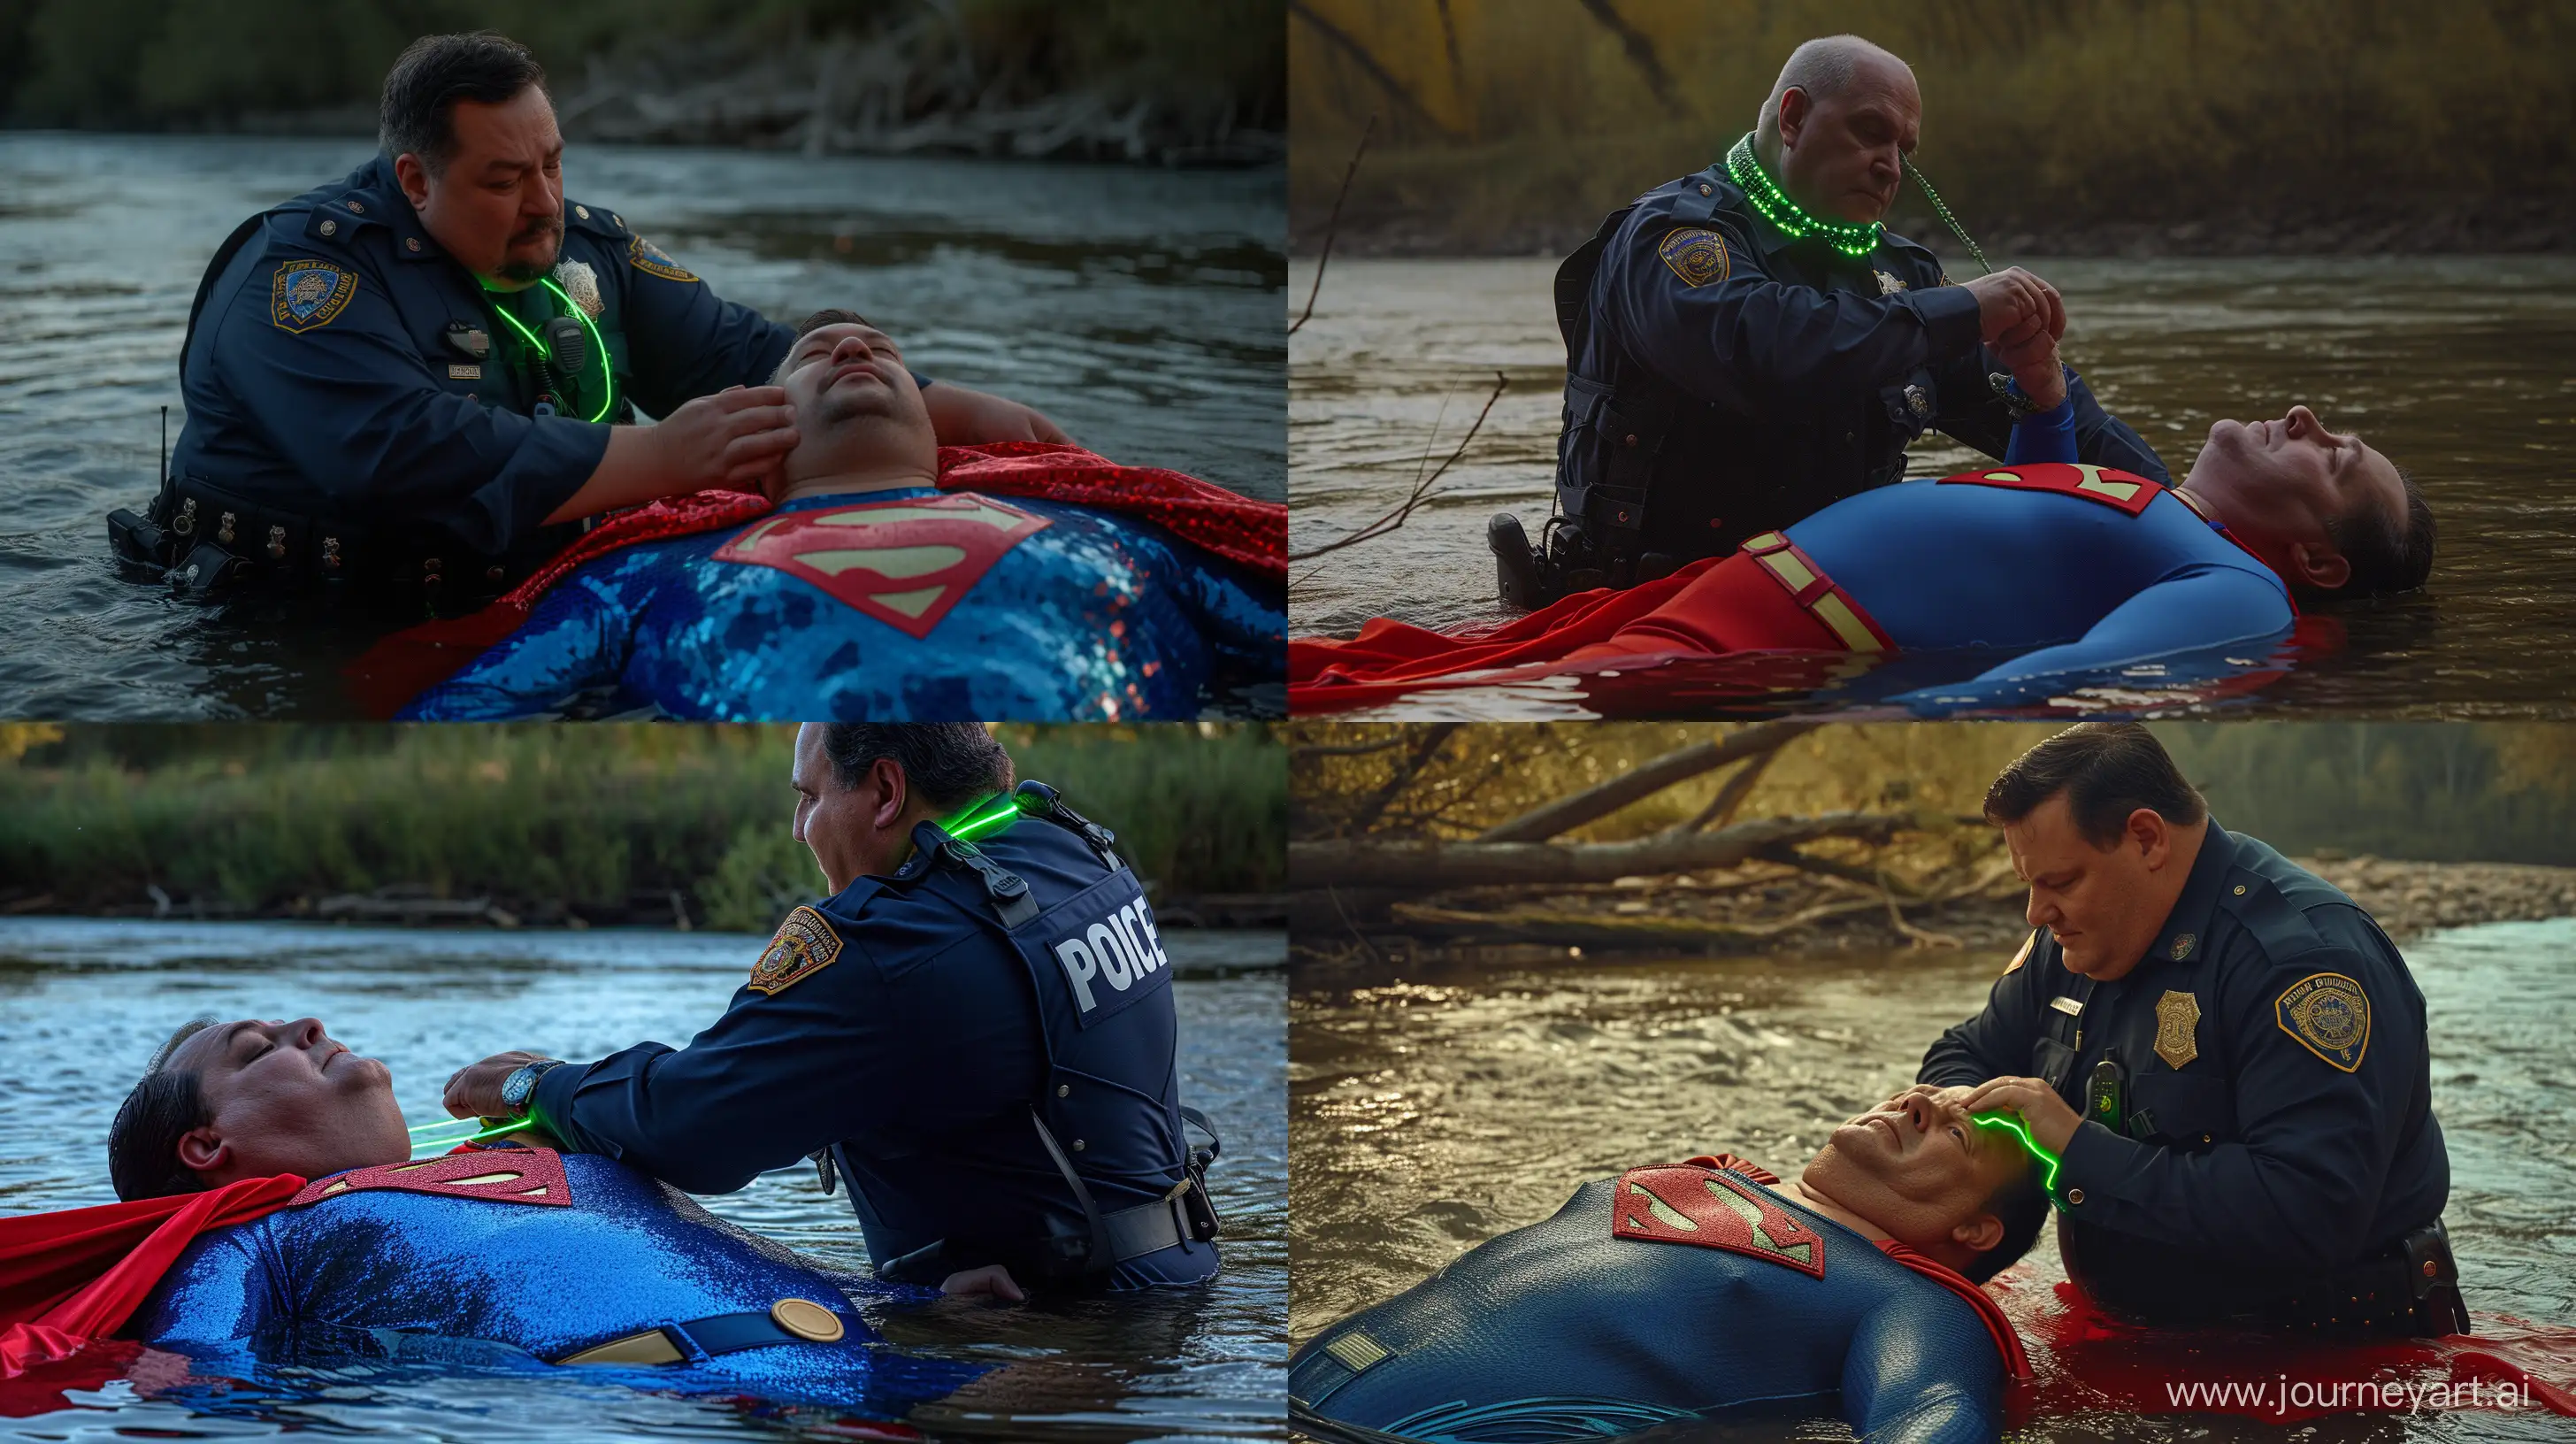 Photo of a 100 kg man aged 60 wearing a navy silk police tactical uniform. Tightening a tight green glowing neon dog collar on the nape of a fat man aged 60 wearing a tight blue 1978 smooth superman costume with a red cape lying in the water. Natural Light. River. --style raw --ar 16:9 